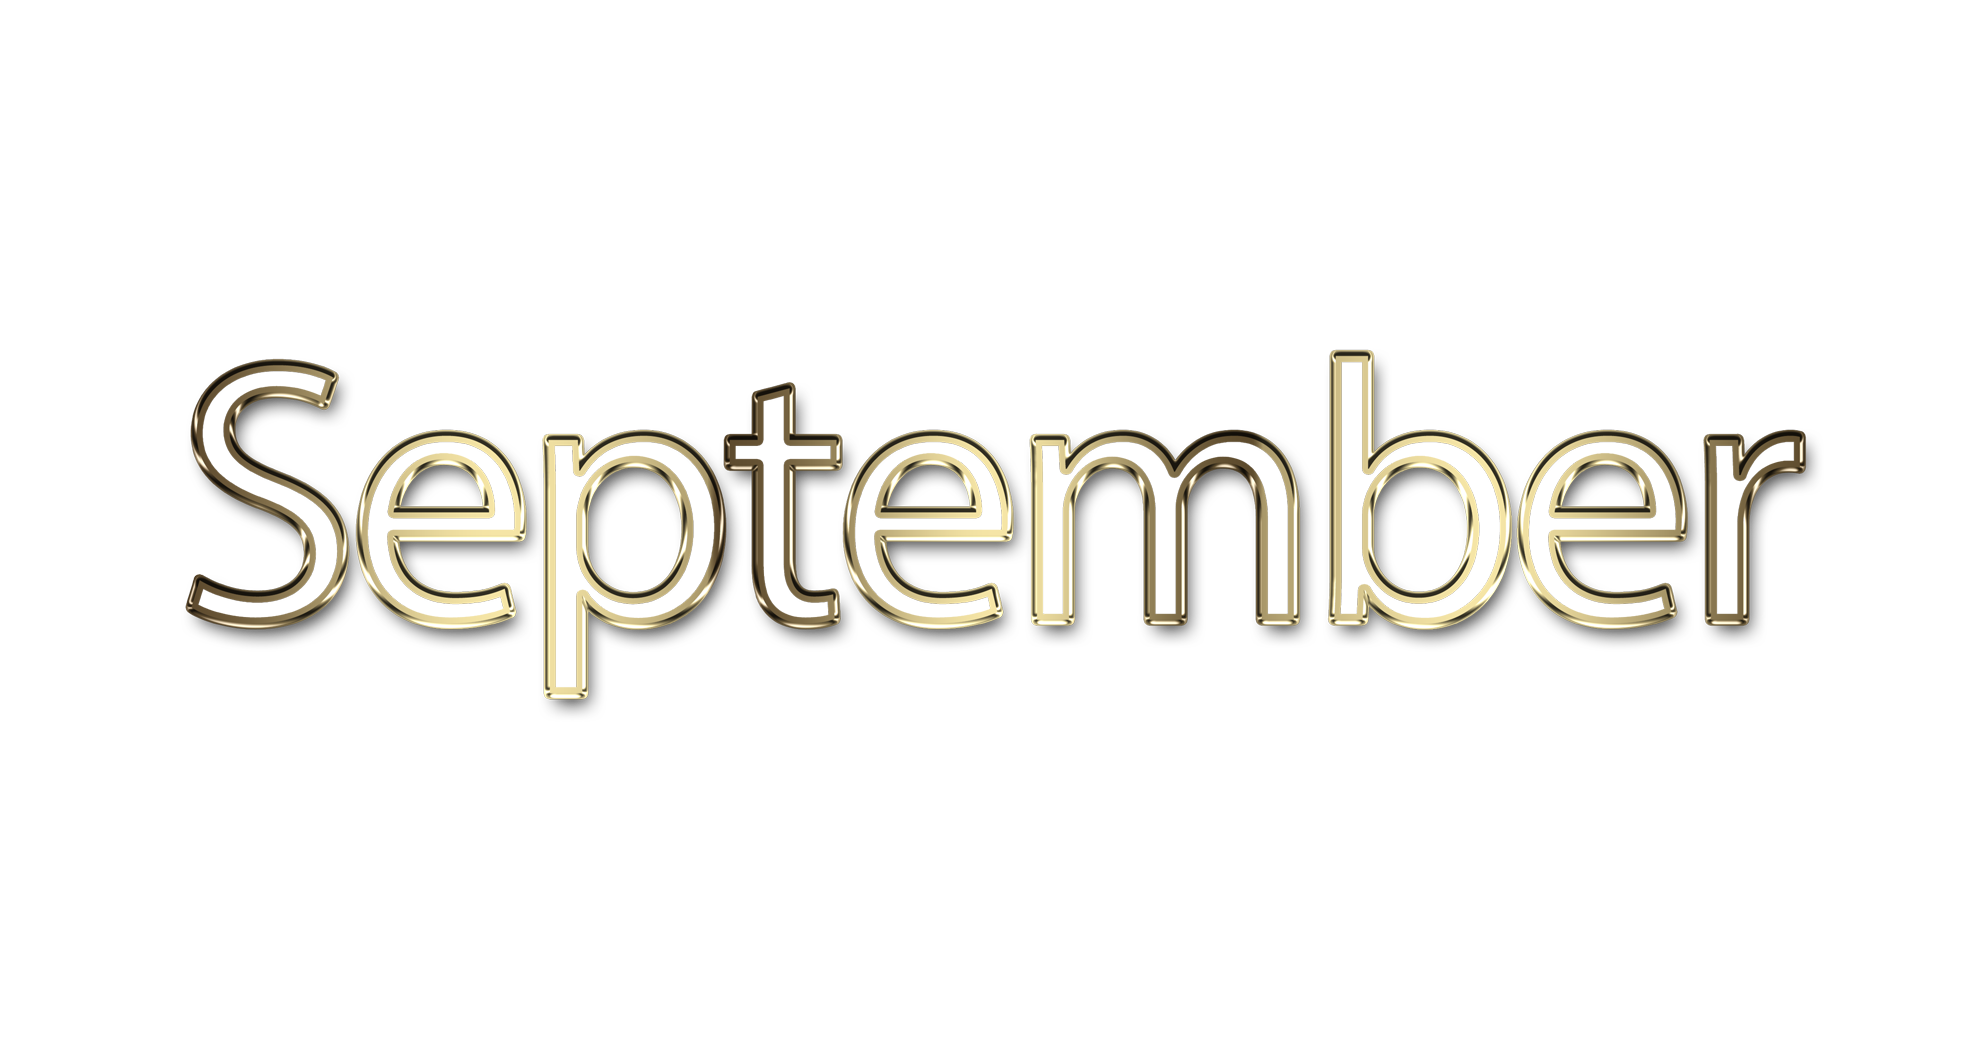 September png, word September png, September word png, September text png, September letters png, September word art typography PNG images, transparent png